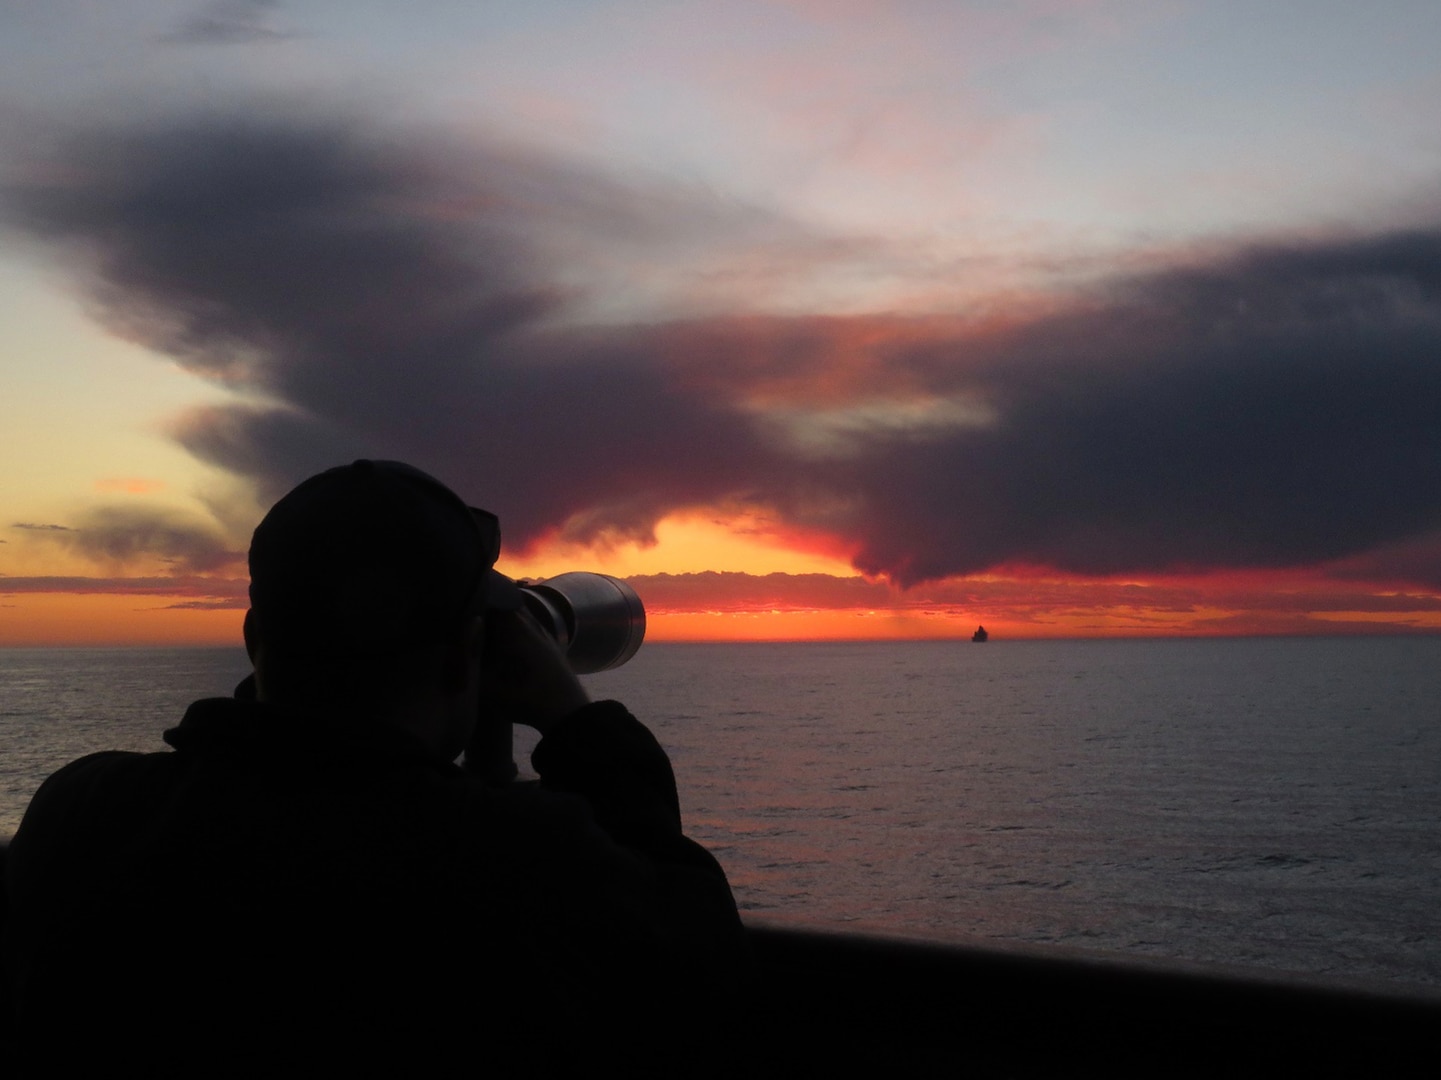 Petty Officer 1st Class Brandon Castelletti, a boatswain’s mate aboard the USCGC Active (WMEC 618), uses binoculars to monitor traffic while patrolling off the coast of San Diego, Mar. 18, 2024. The Active’s crew returned home to Port Angeles, Washington, May 3, 2024, after completing a 54-day multi-mission patrol supporting Joint Interagency Task Force-South’s (JIATF-S) counternarcotics patrol in the Eastern Pacific Ocean. U.S. Coast Guard photo by Ens. Thomas Gehman.